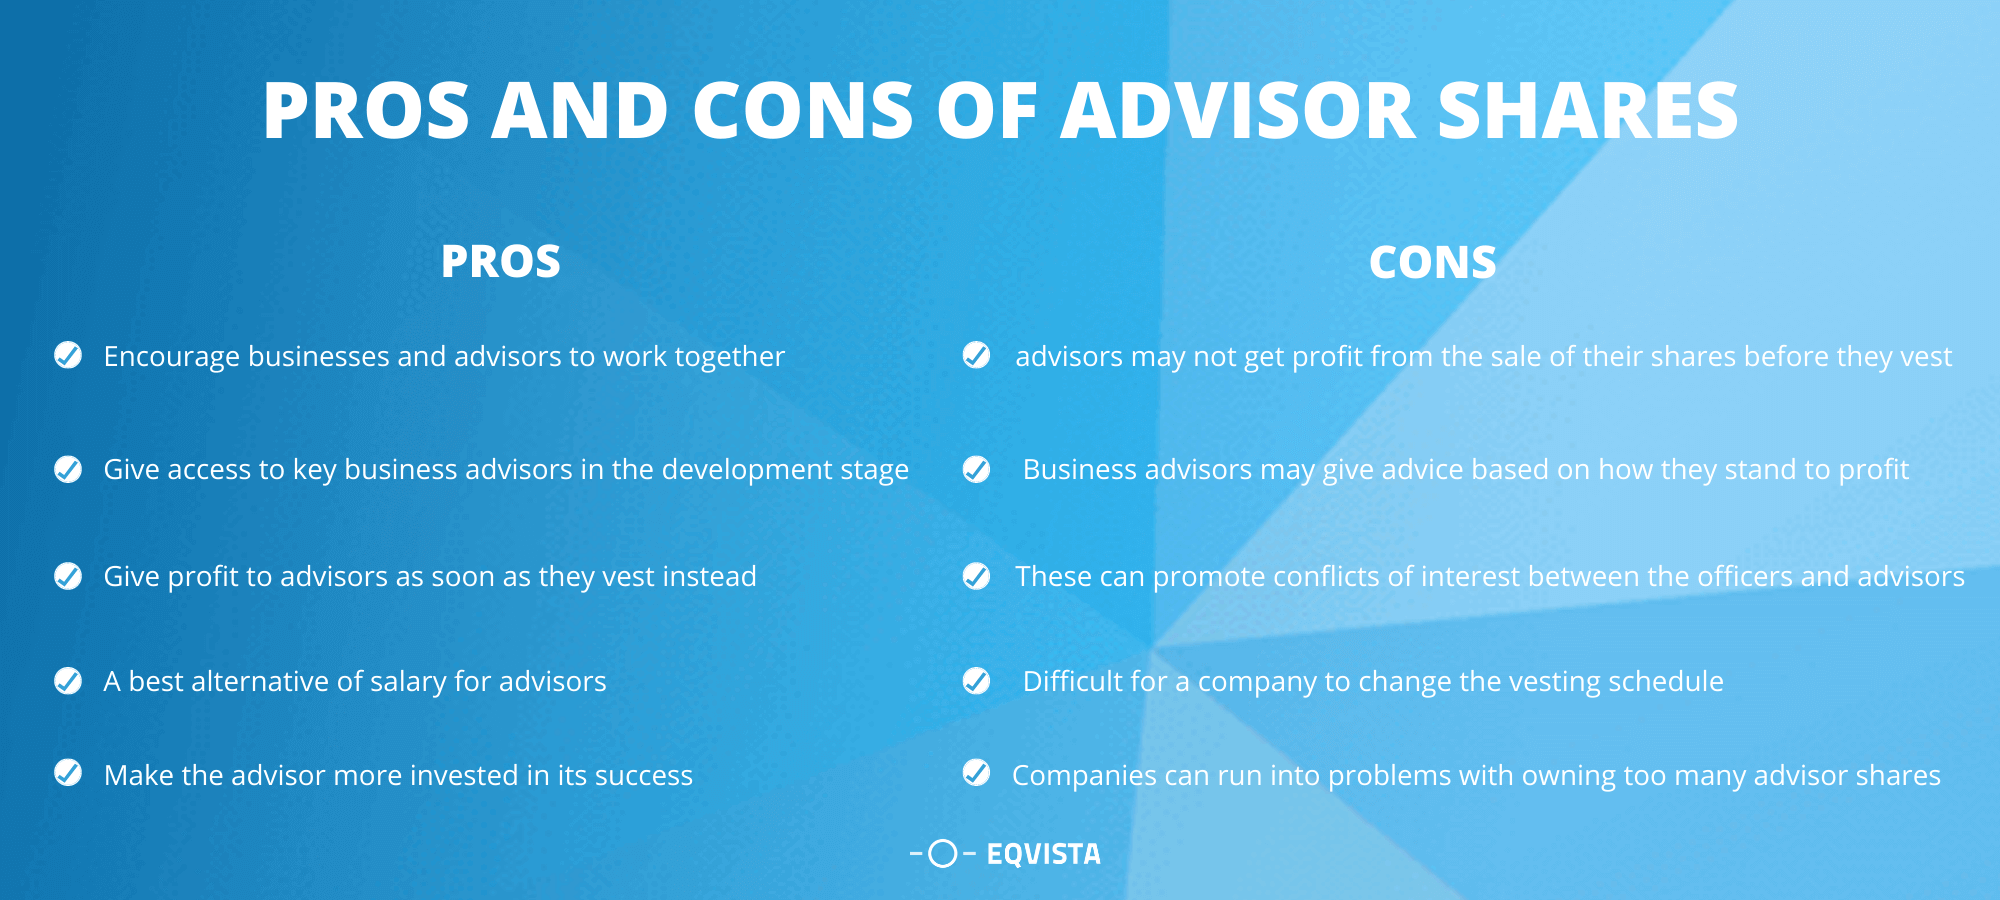 Pros and cons of advisor shares